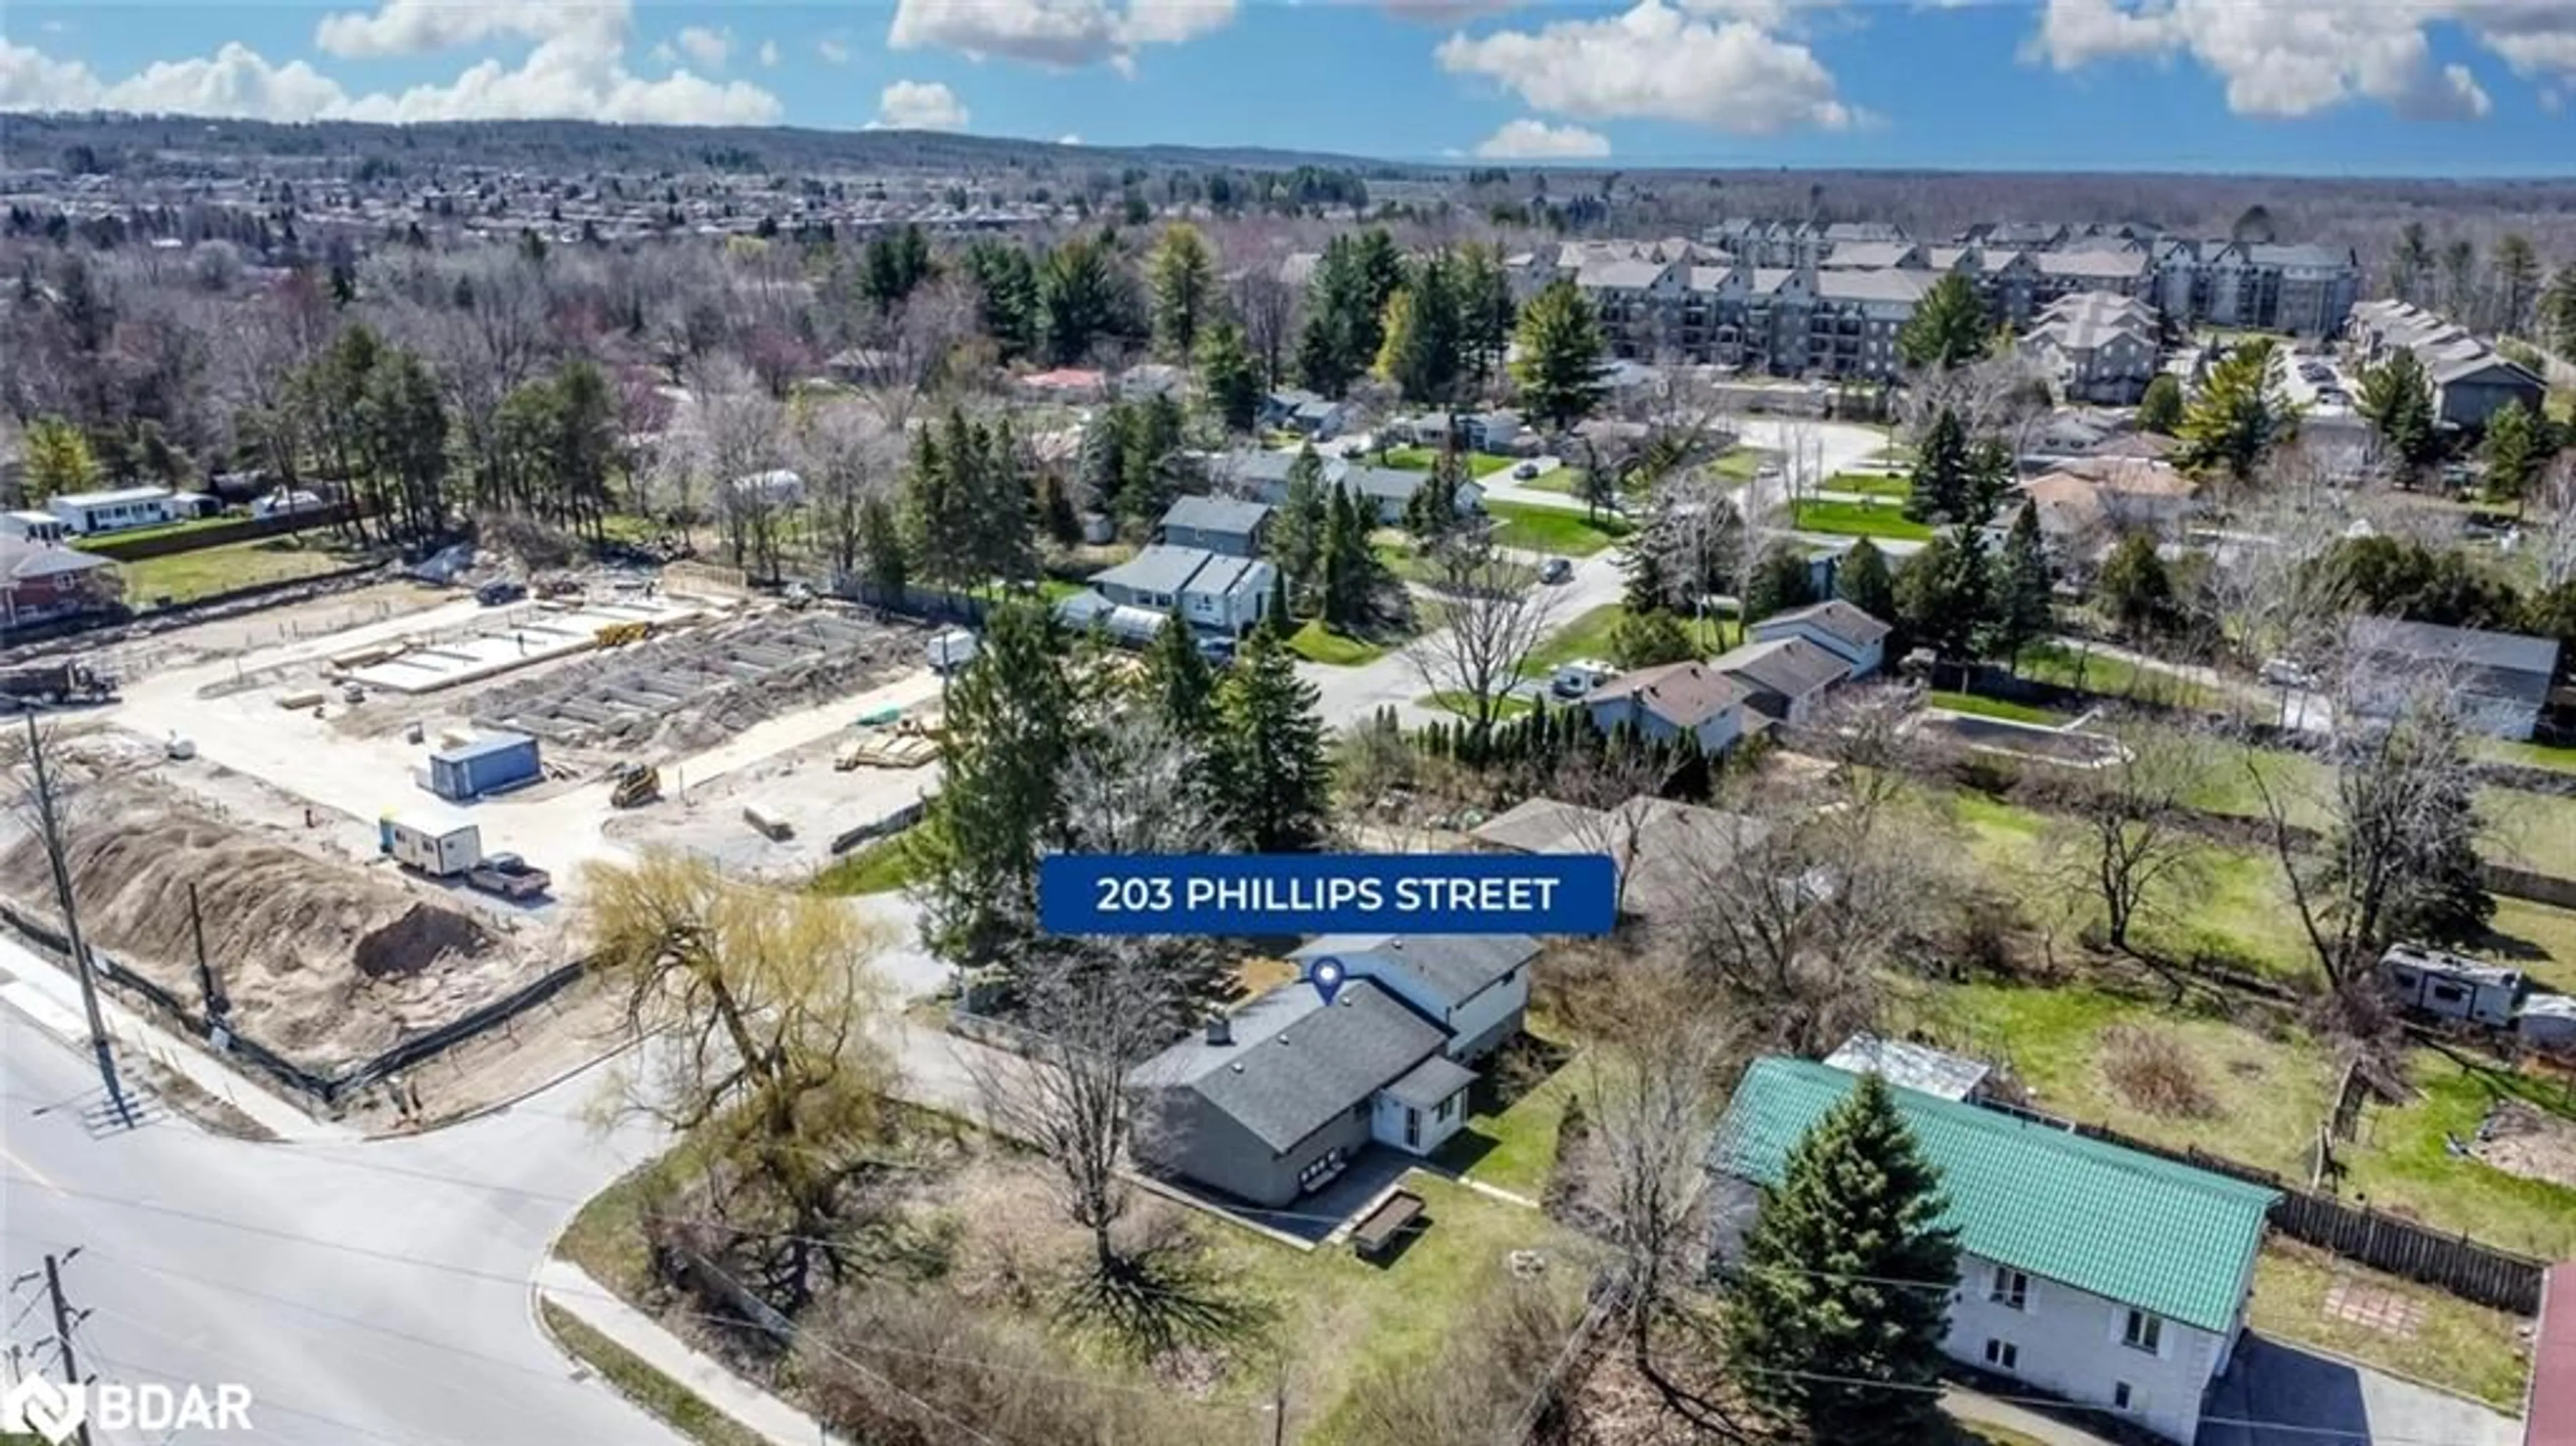 A view of a street for 203 Phillips St, Barrie Ontario L4N 3V2